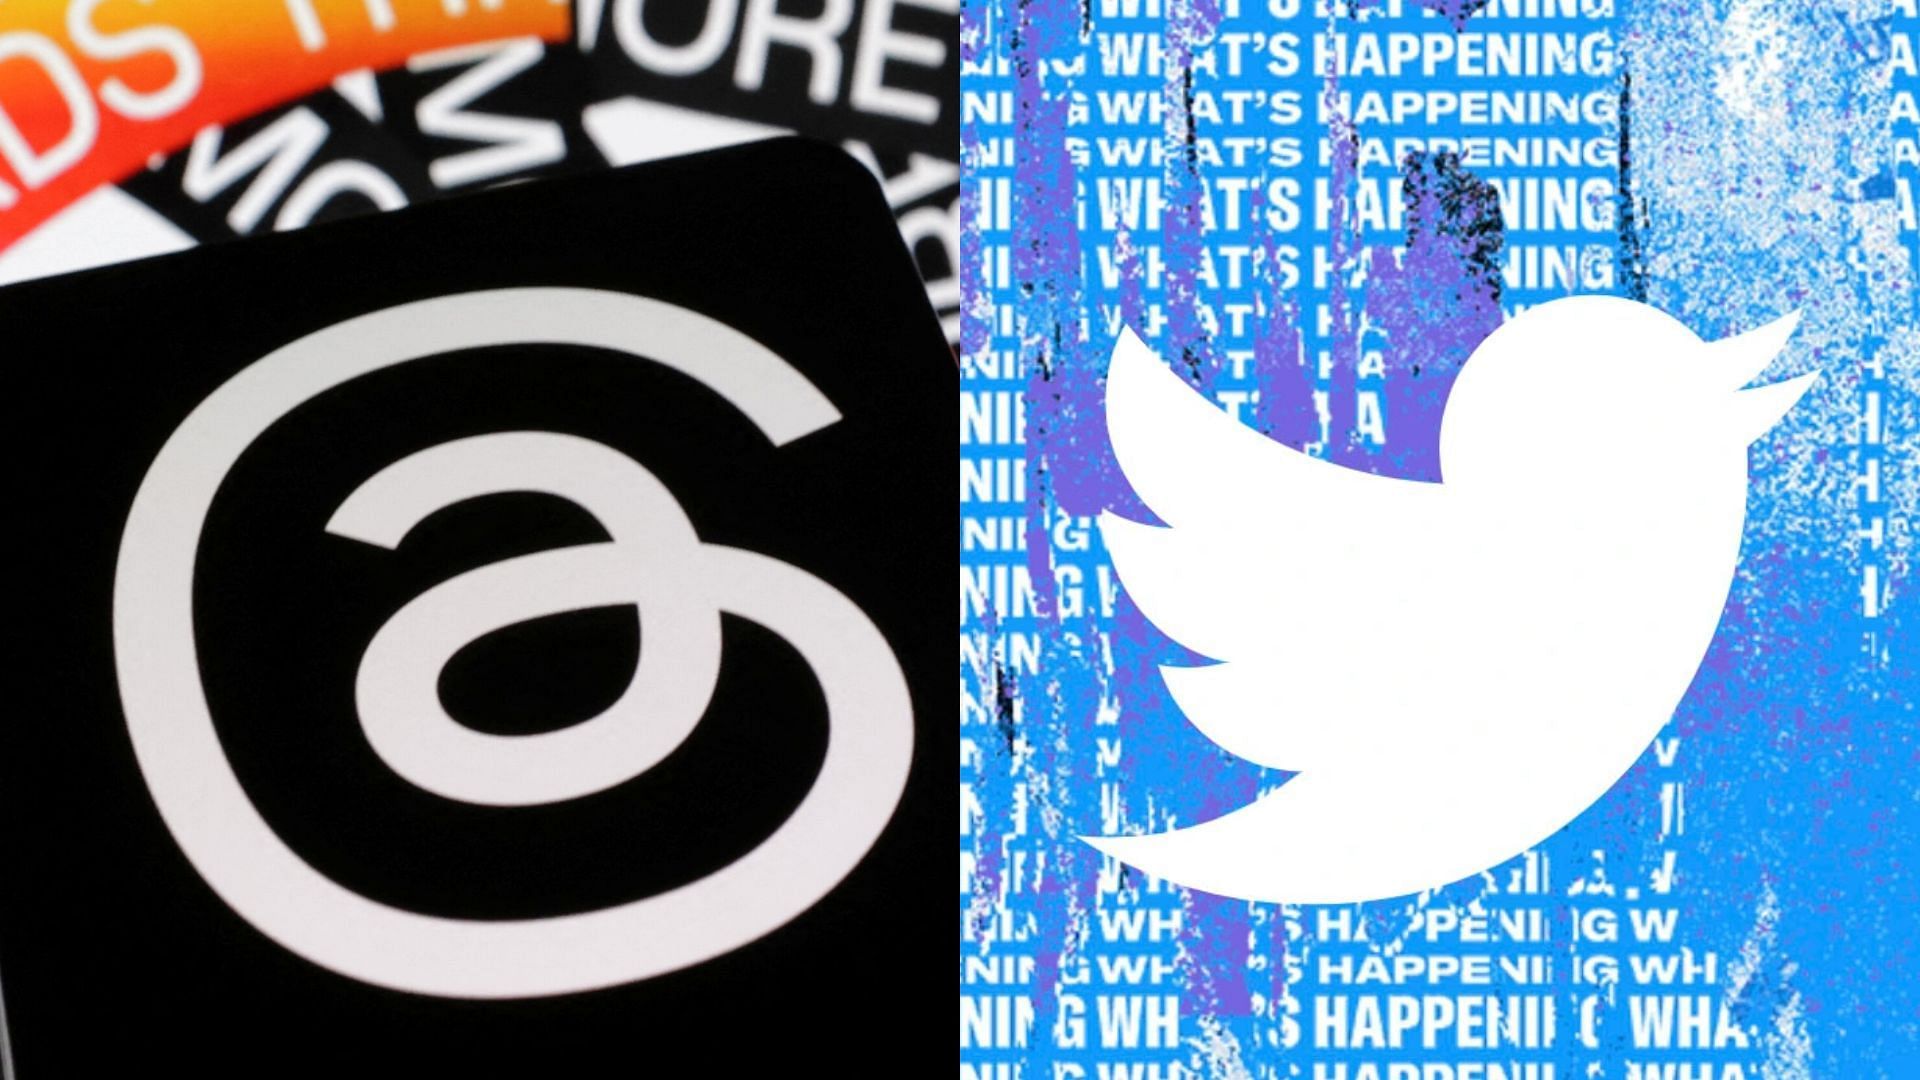 Threads is losing users as netizens revert back to Twitter (Image via Meta and Twitter)